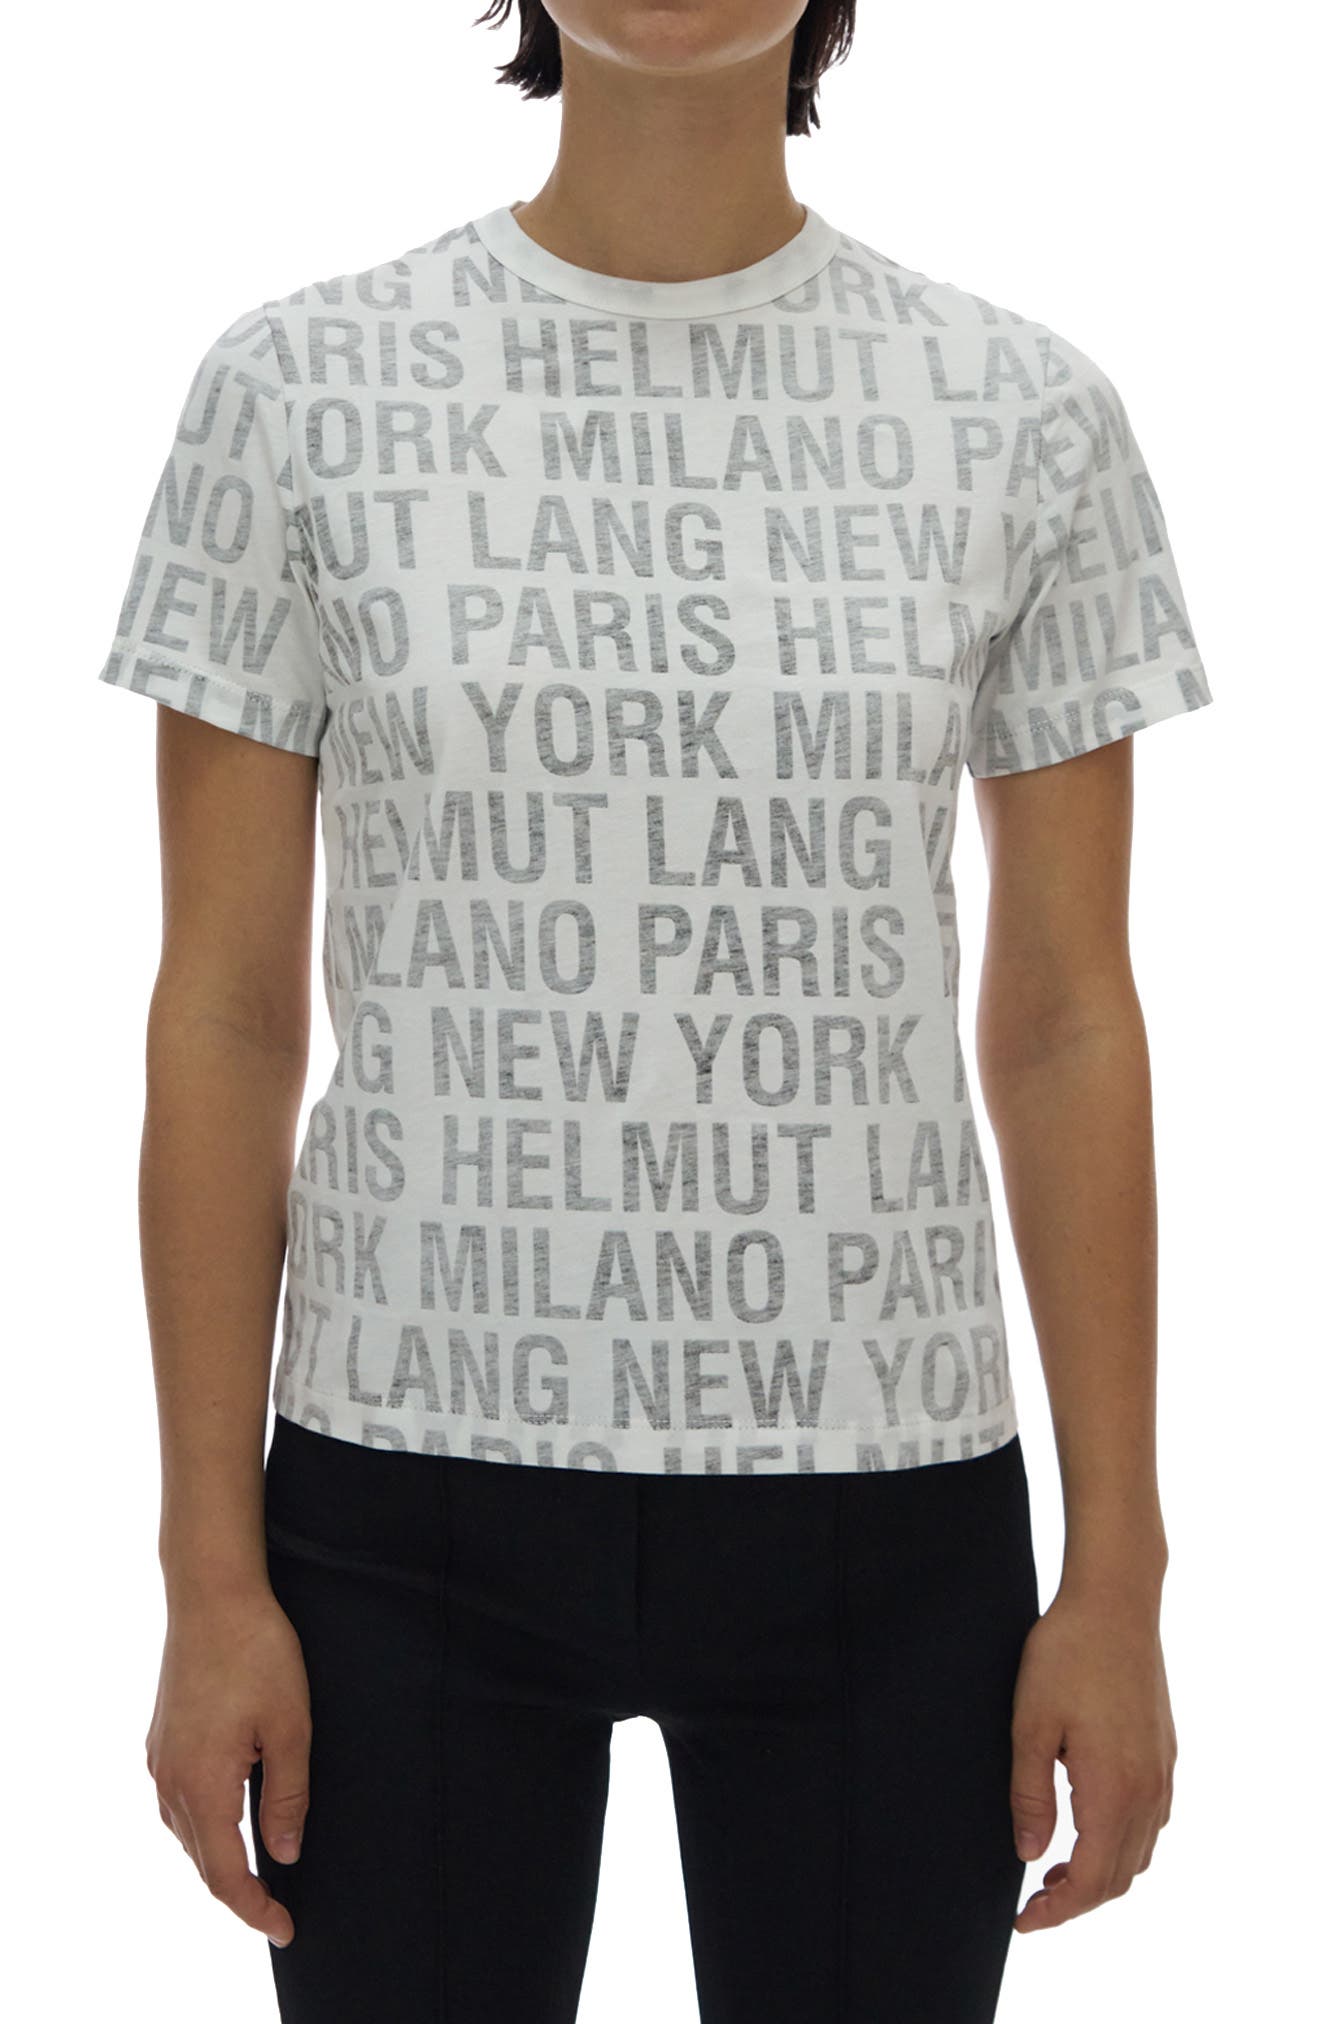 Helmut Lang Allover Print T-Shirt in White at Nordstrom, Size X-Small